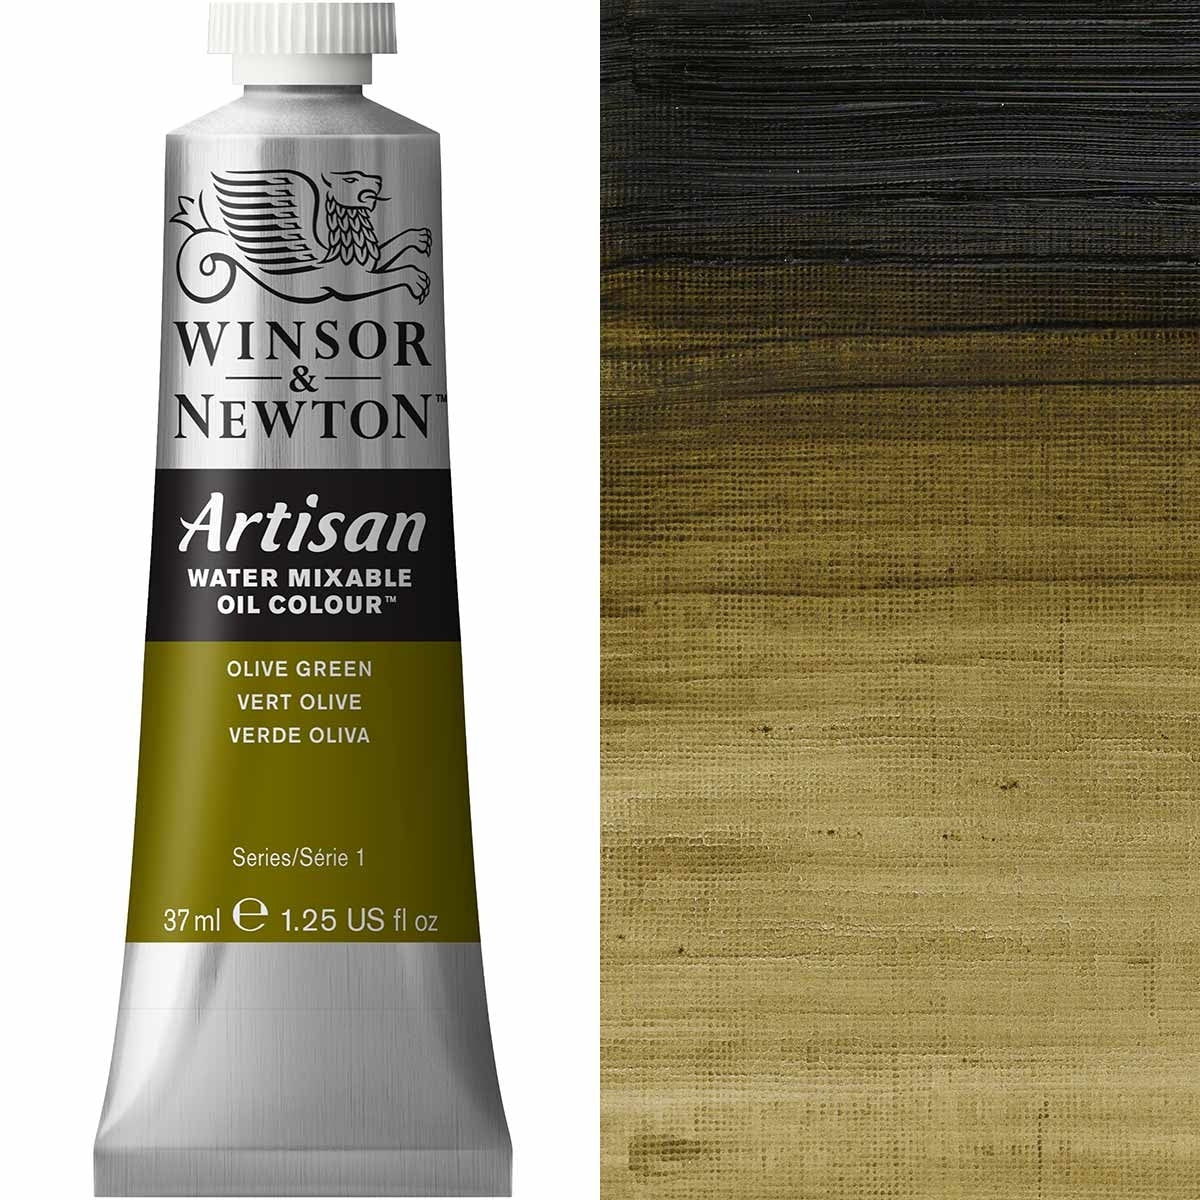 Winsor and Newton - Artisan Oil Colour Watermixable - 37ml - Olive Green